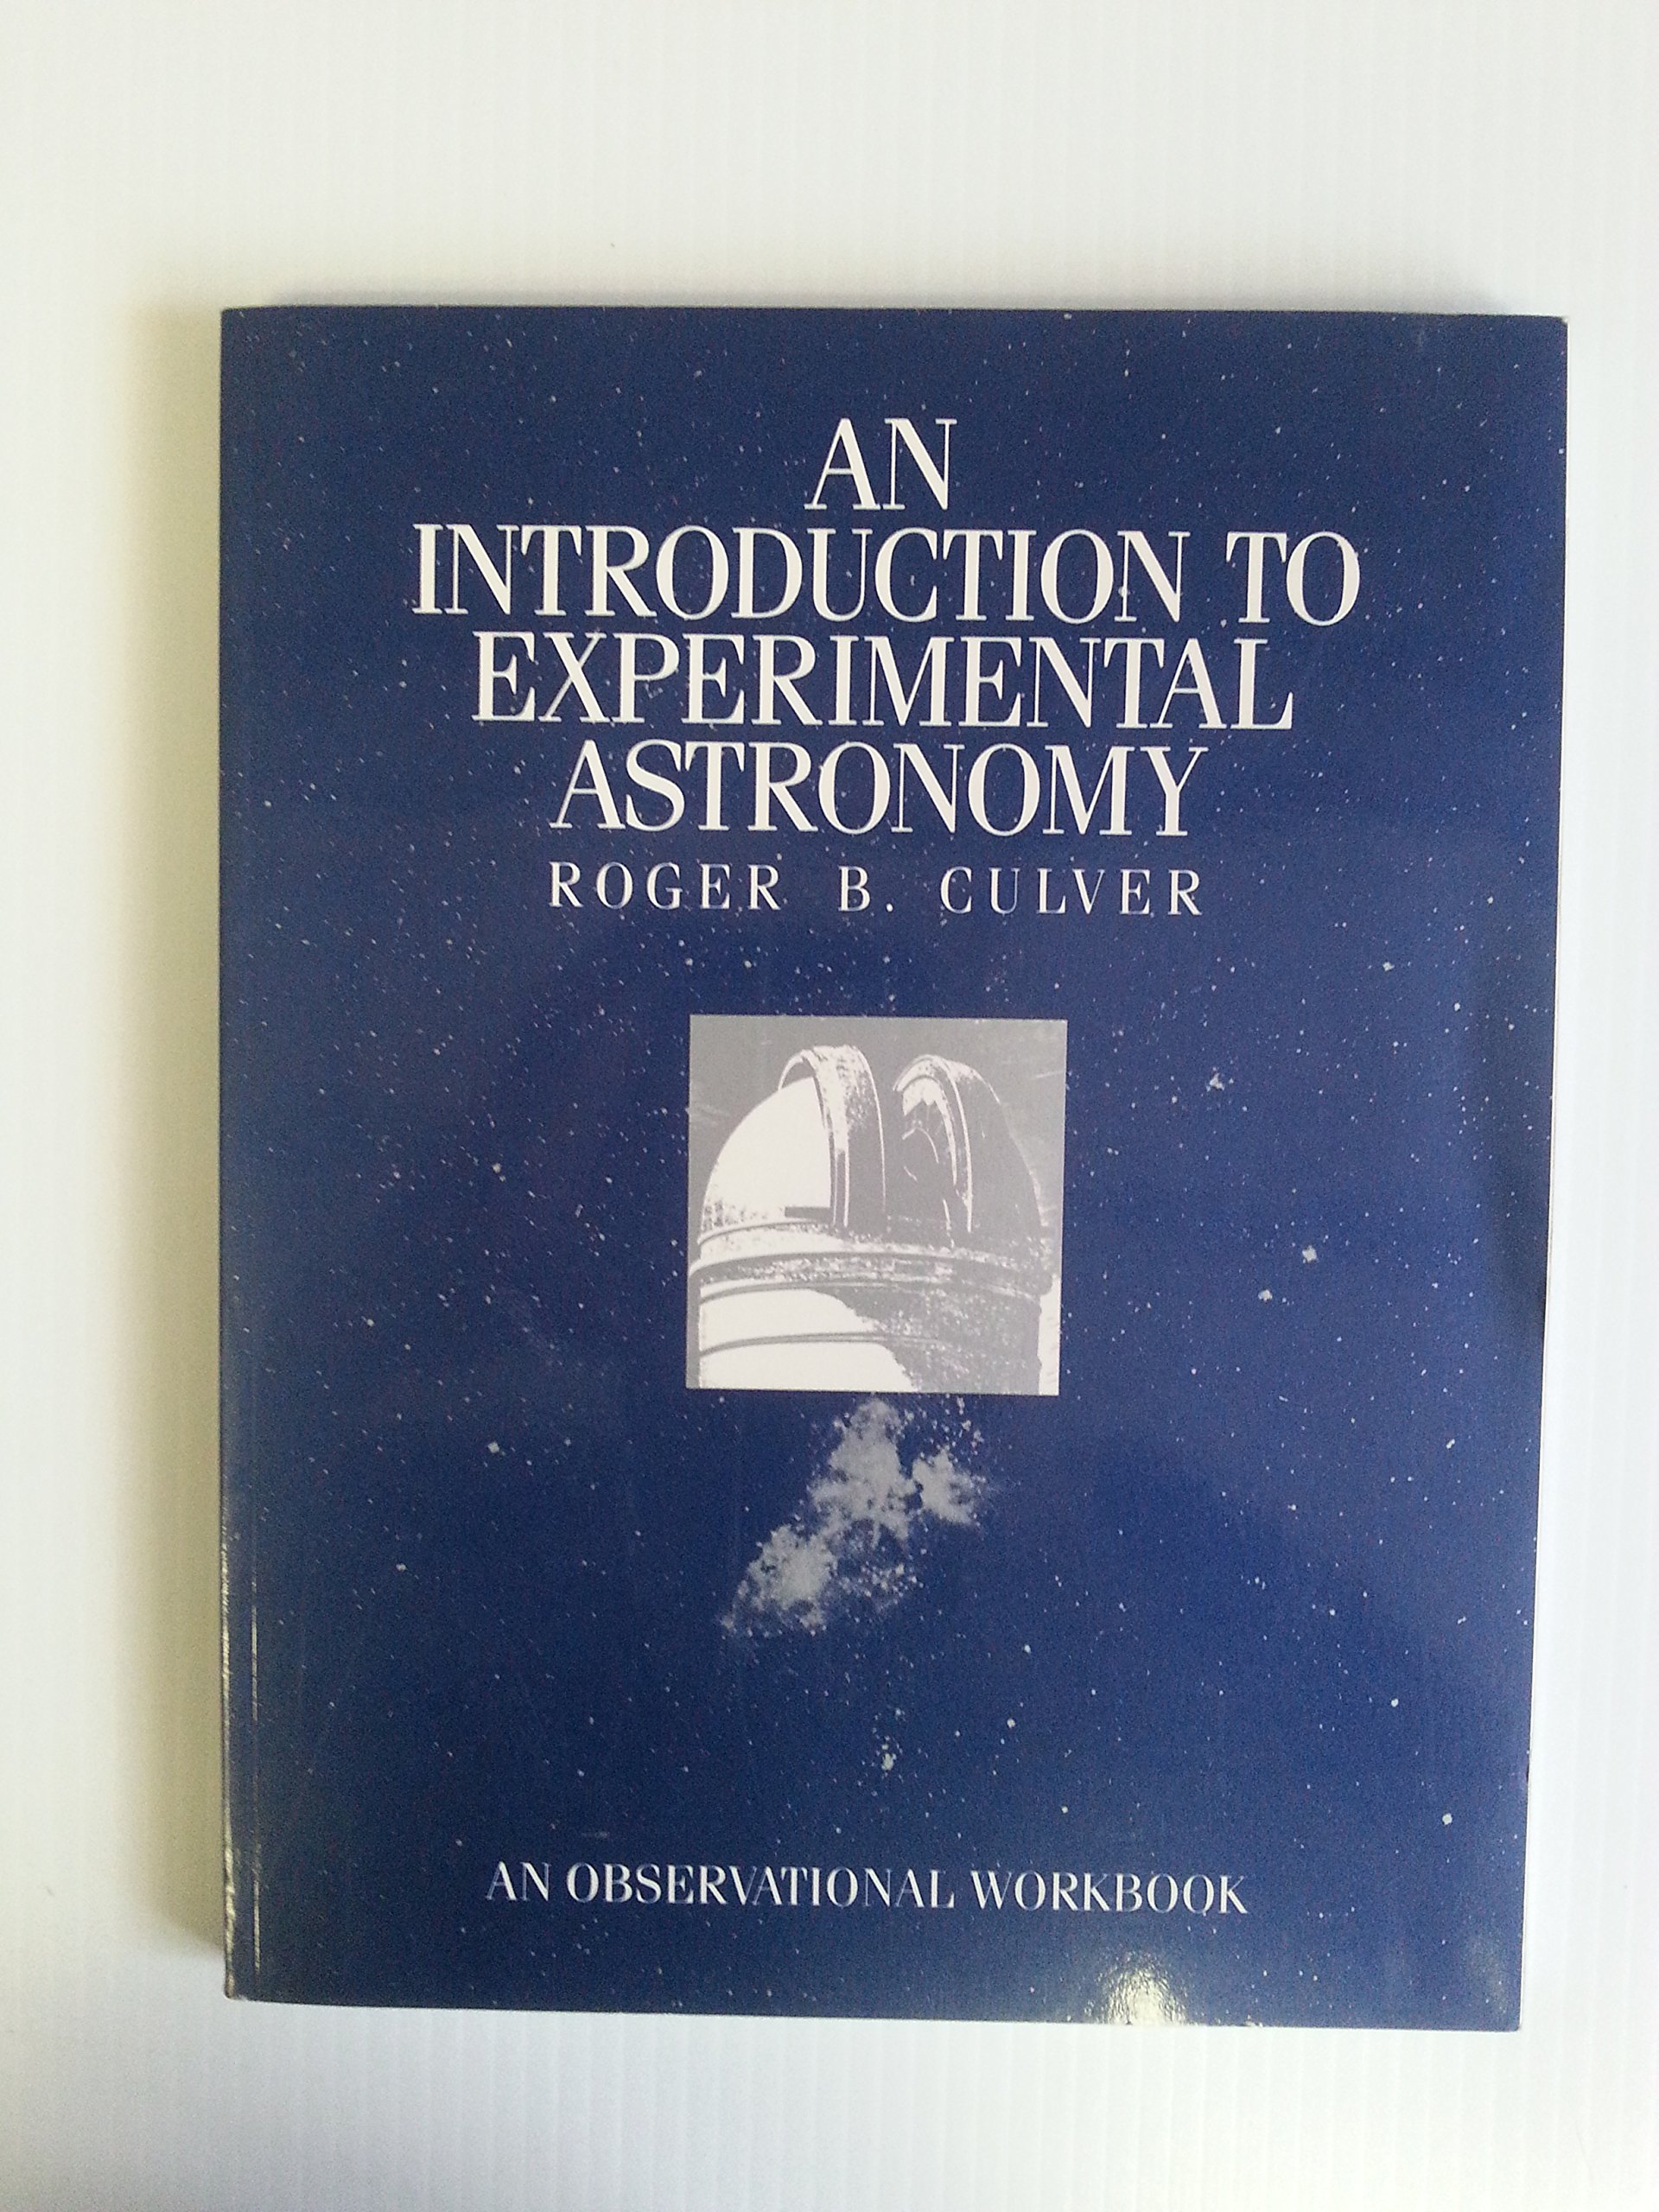 Introduction to Experimental Astronomy: An Observational Workbook